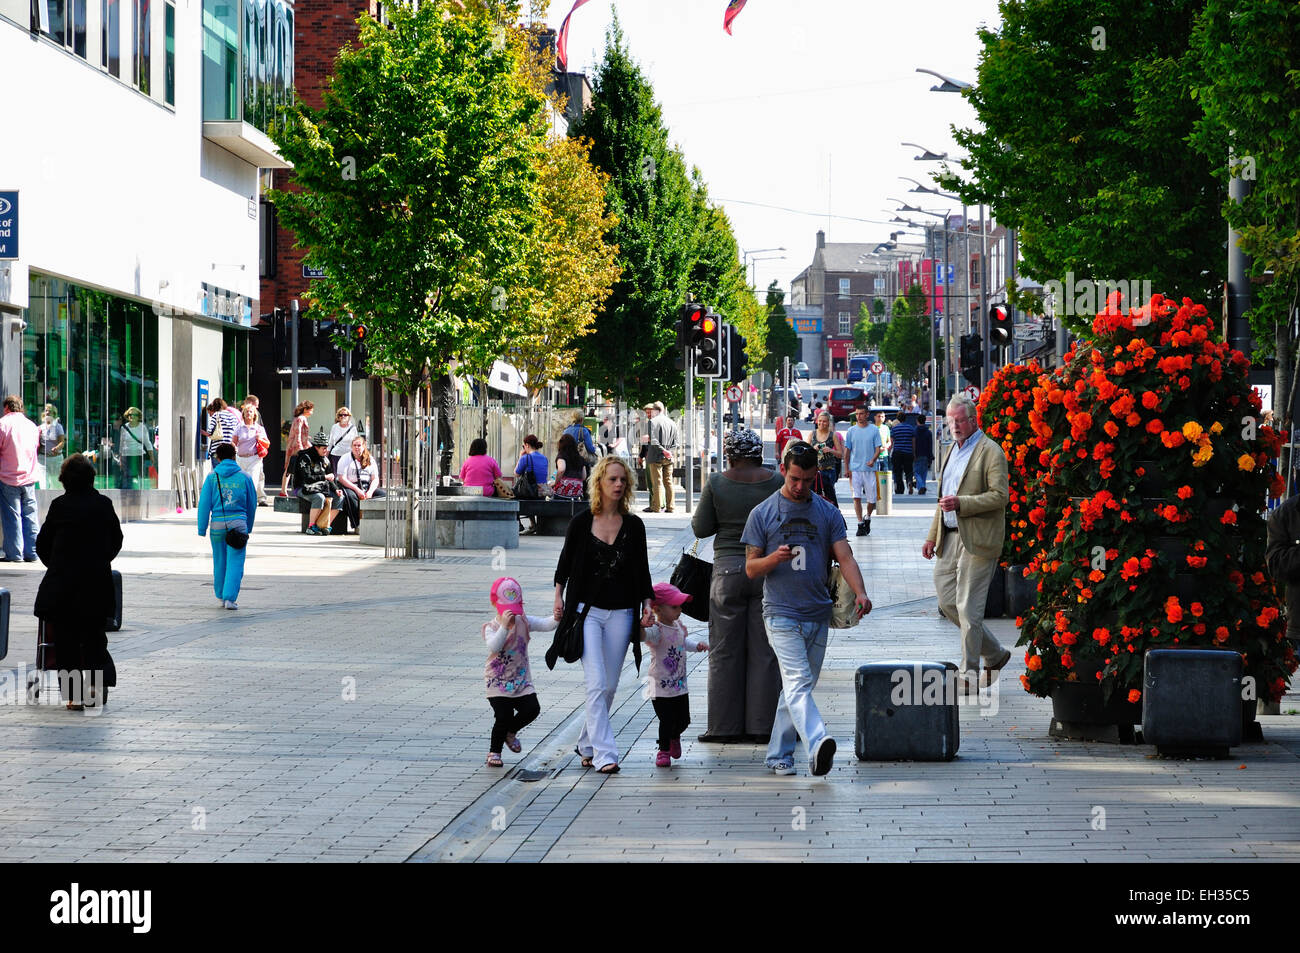 Limerick is a city in Ireland. It is located in the Mid-West Region and is also part of the province of Munster. Stock Photo